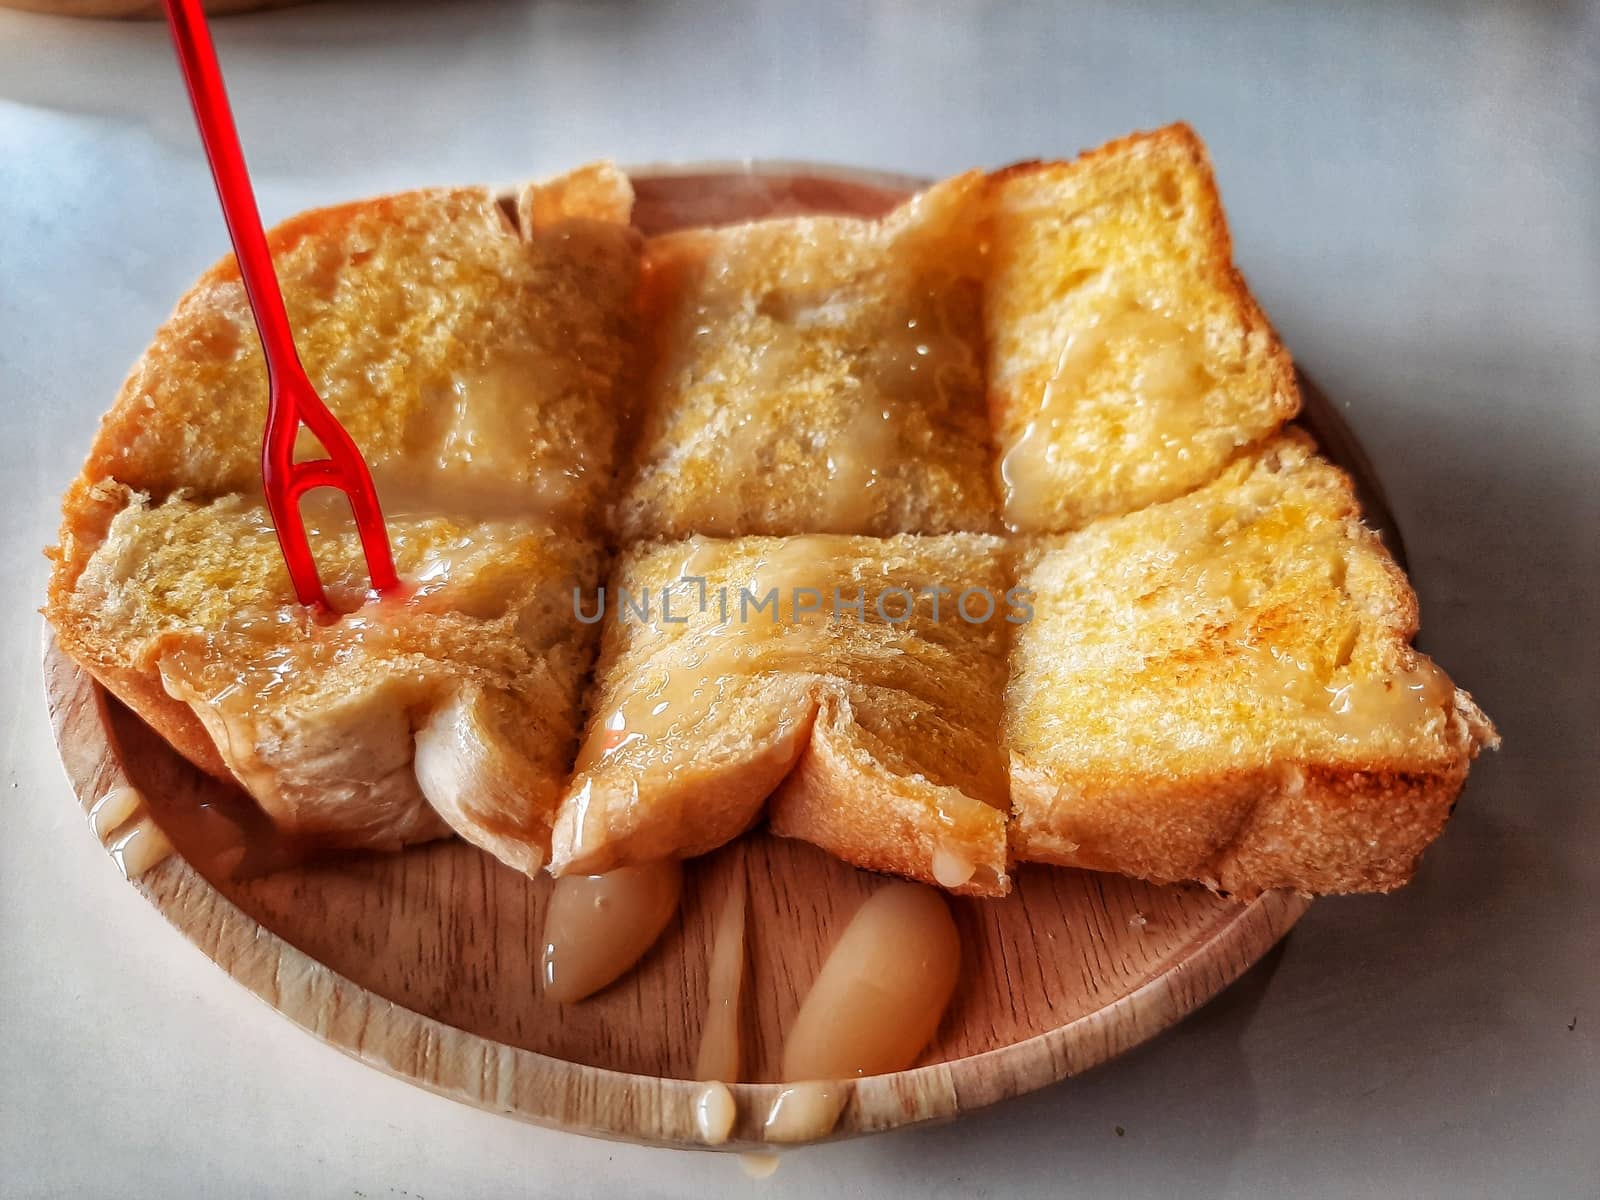 Crusty Bread Toast Slice with caramel On wooden plate Background by peerapixs